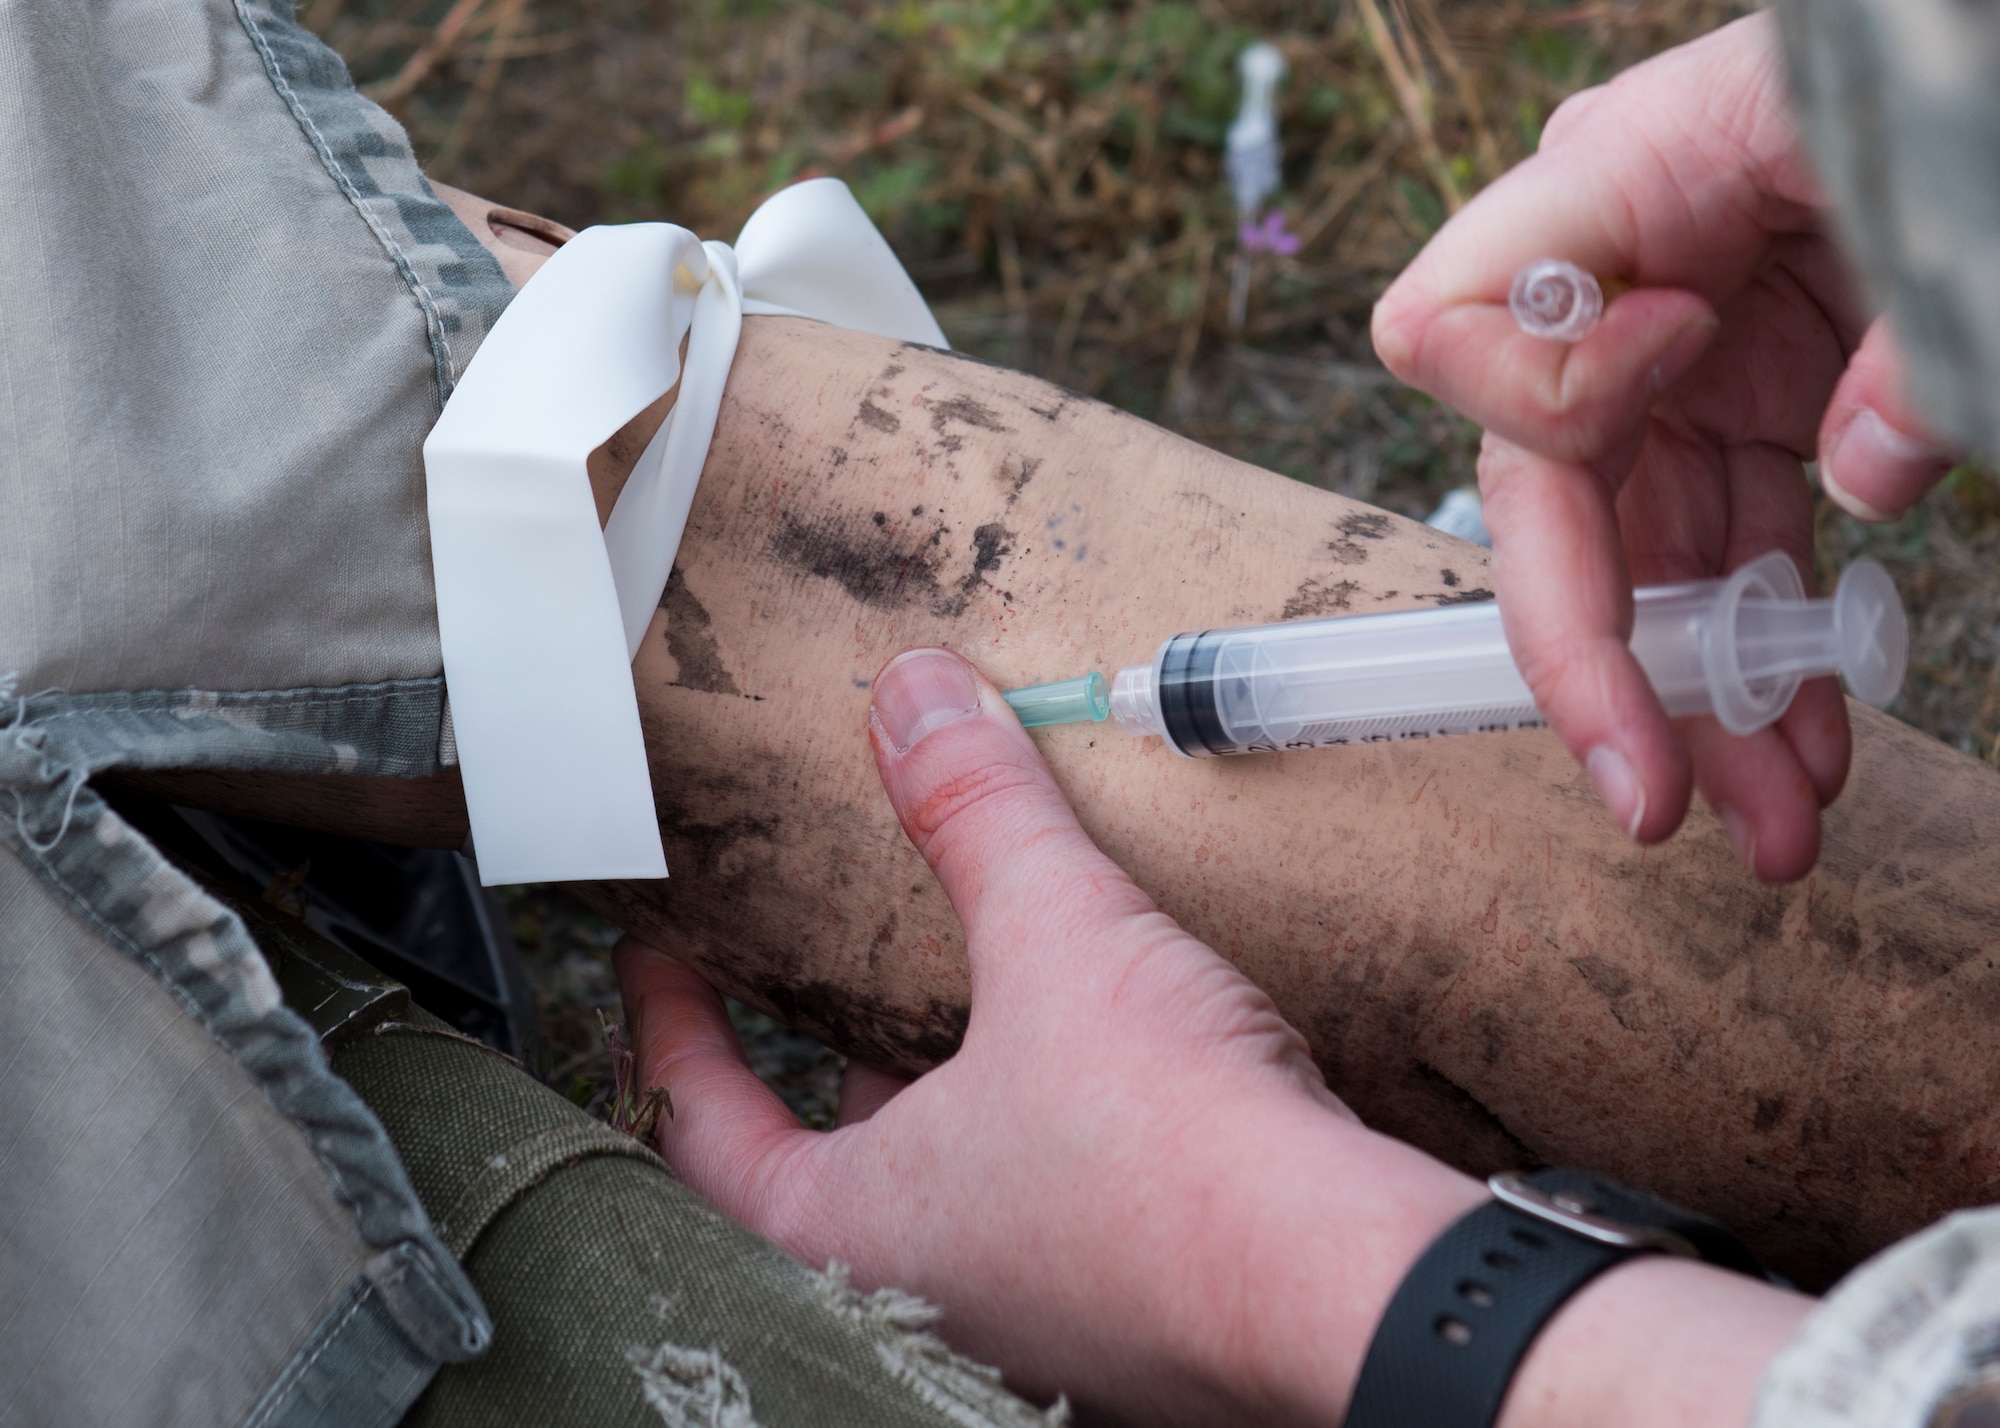 A student provides an injection to a ‘wounded’ training mannequin during the Tactical Combat Casualty Care course at Fairchild Air Force Base, Washington, Sept. 12, 2019. TCCC is designed to help lessen preventable combat deaths by providing proven trauma stabilization techniques, allowing for wounded to survive long enough to receive life-saving treatment. (U.S. Air Force photo by Senior Airman Ryan Lackey)